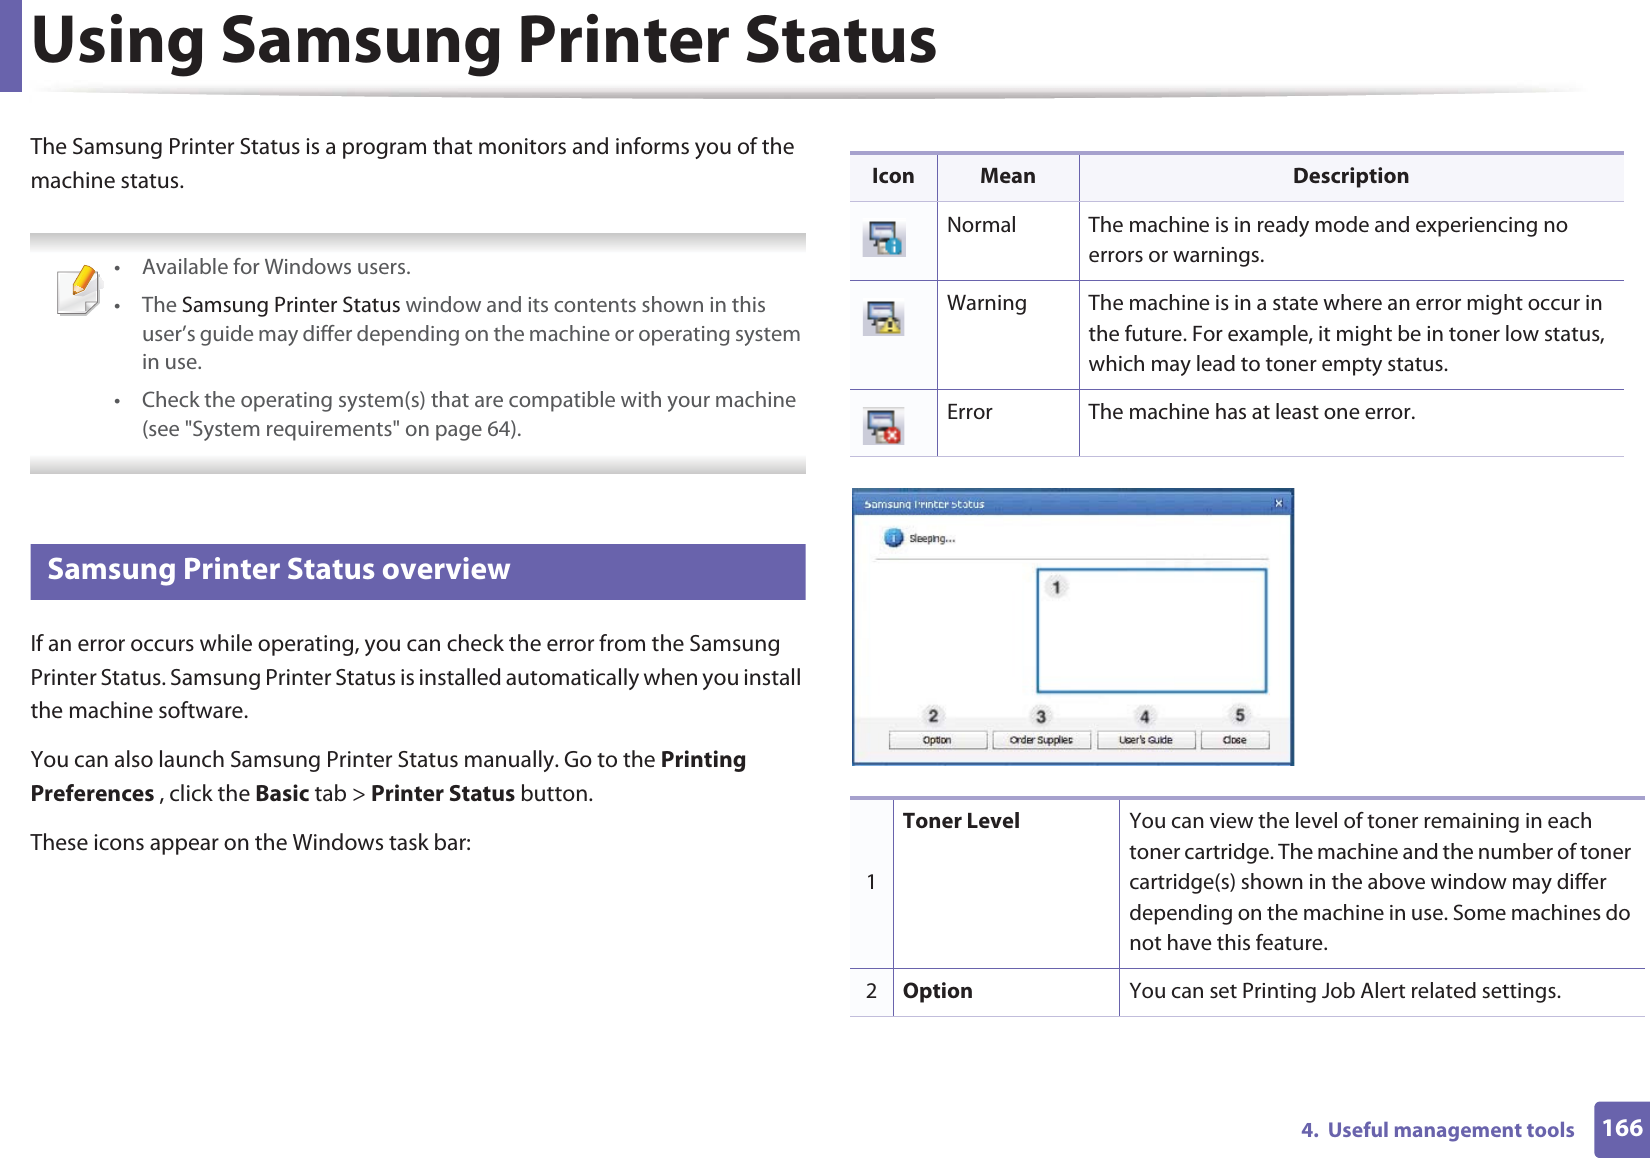 1664.  Useful management toolsUsing Samsung Printer StatusThe Samsung Printer Status is a program that monitors and informs you of the machine status.  • Available for Windows users.• The Samsung Printer Status window and its contents shown in this user’s guide may differ depending on the machine or operating system in use.• Check the operating system(s) that are compatible with your machine (see &quot;System requirements&quot; on page 64). 7 Samsung Printer Status overviewIf an error occurs while operating, you can check the error from the Samsung Printer Status. Samsung Printer Status is installed automatically when you install the machine software. You can also launch Samsung Printer Status manually. Go to the Printing Preferences , click the Basic tab &gt; Printer Status button.These icons appear on the Windows task bar:Icon Mean DescriptionNormal The machine is in ready mode and experiencing no errors or warnings.Warning The machine is in a state where an error might occur in the future. For example, it might be in toner low status, which may lead to toner empty status. Error The machine has at least one error.1Toner Level You can view the level of toner remaining in each toner cartridge. The machine and the number of toner cartridge(s) shown in the above window may differ depending on the machine in use. Some machines do not have this feature.2Option You can set Printing Job Alert related settings.